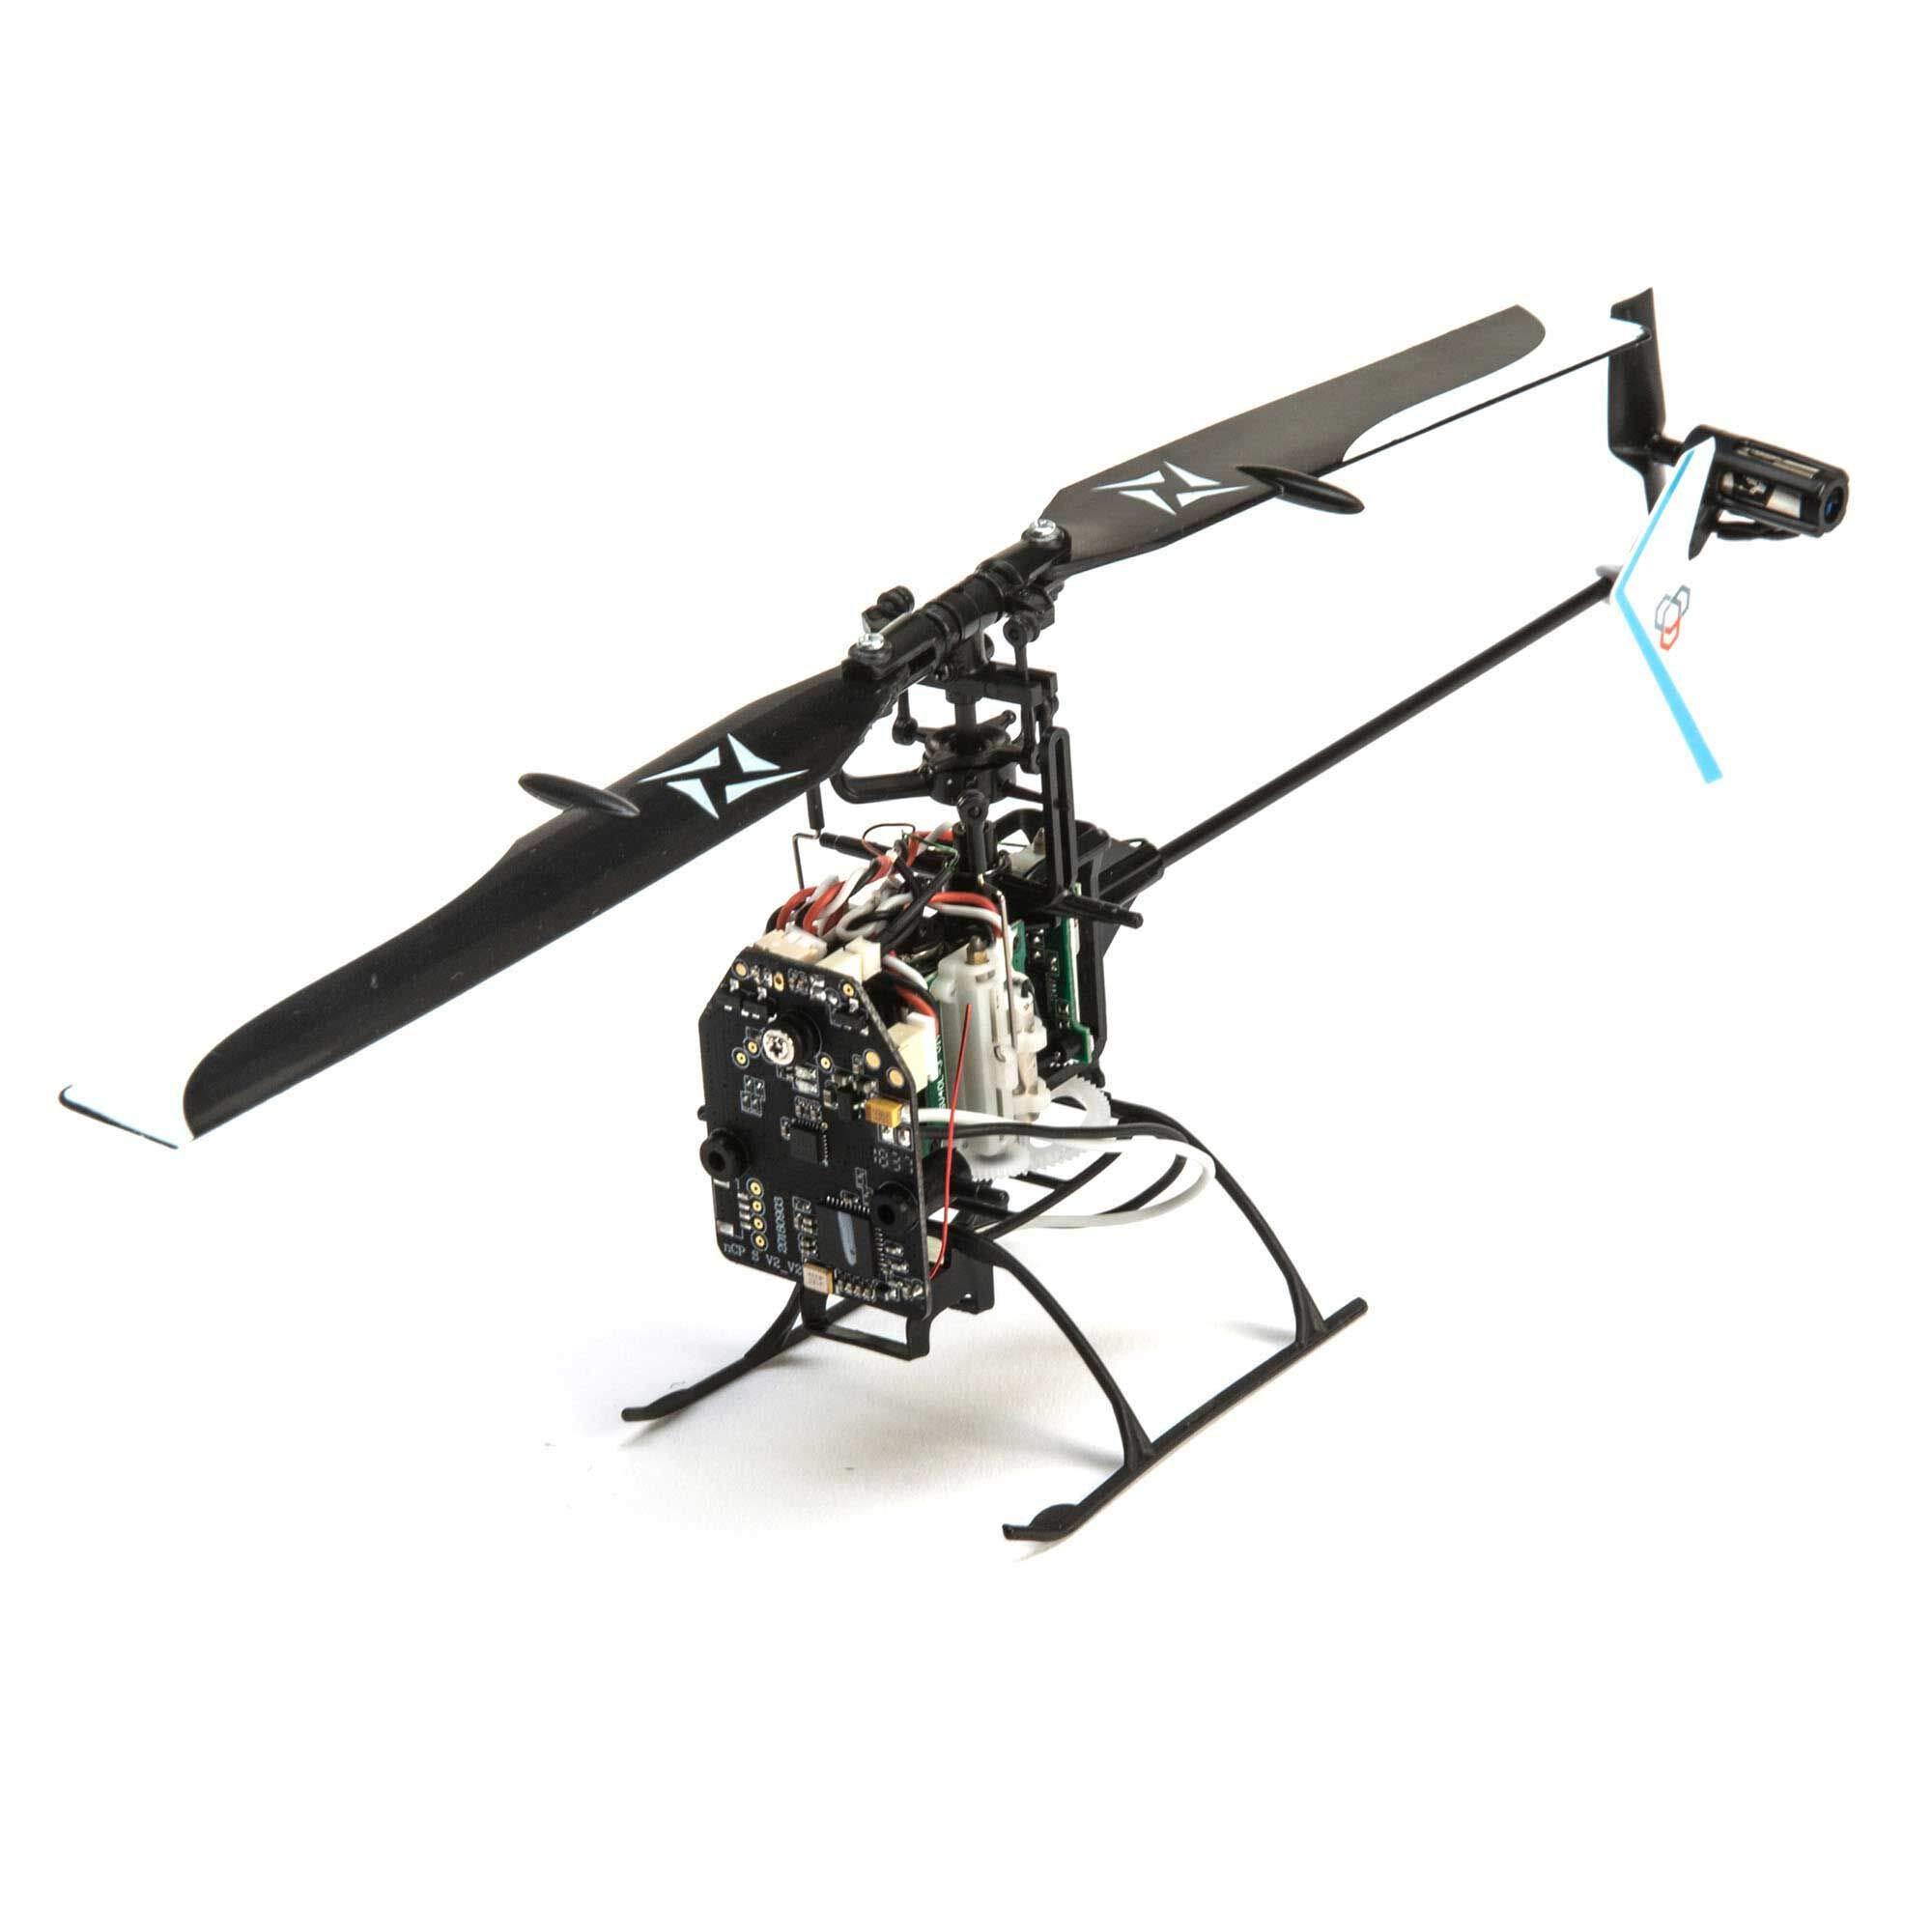 Best Micro 3D Rc Helicopter: Top-Rated Micro 3D RC Helicopter: The Blade Nano CP S